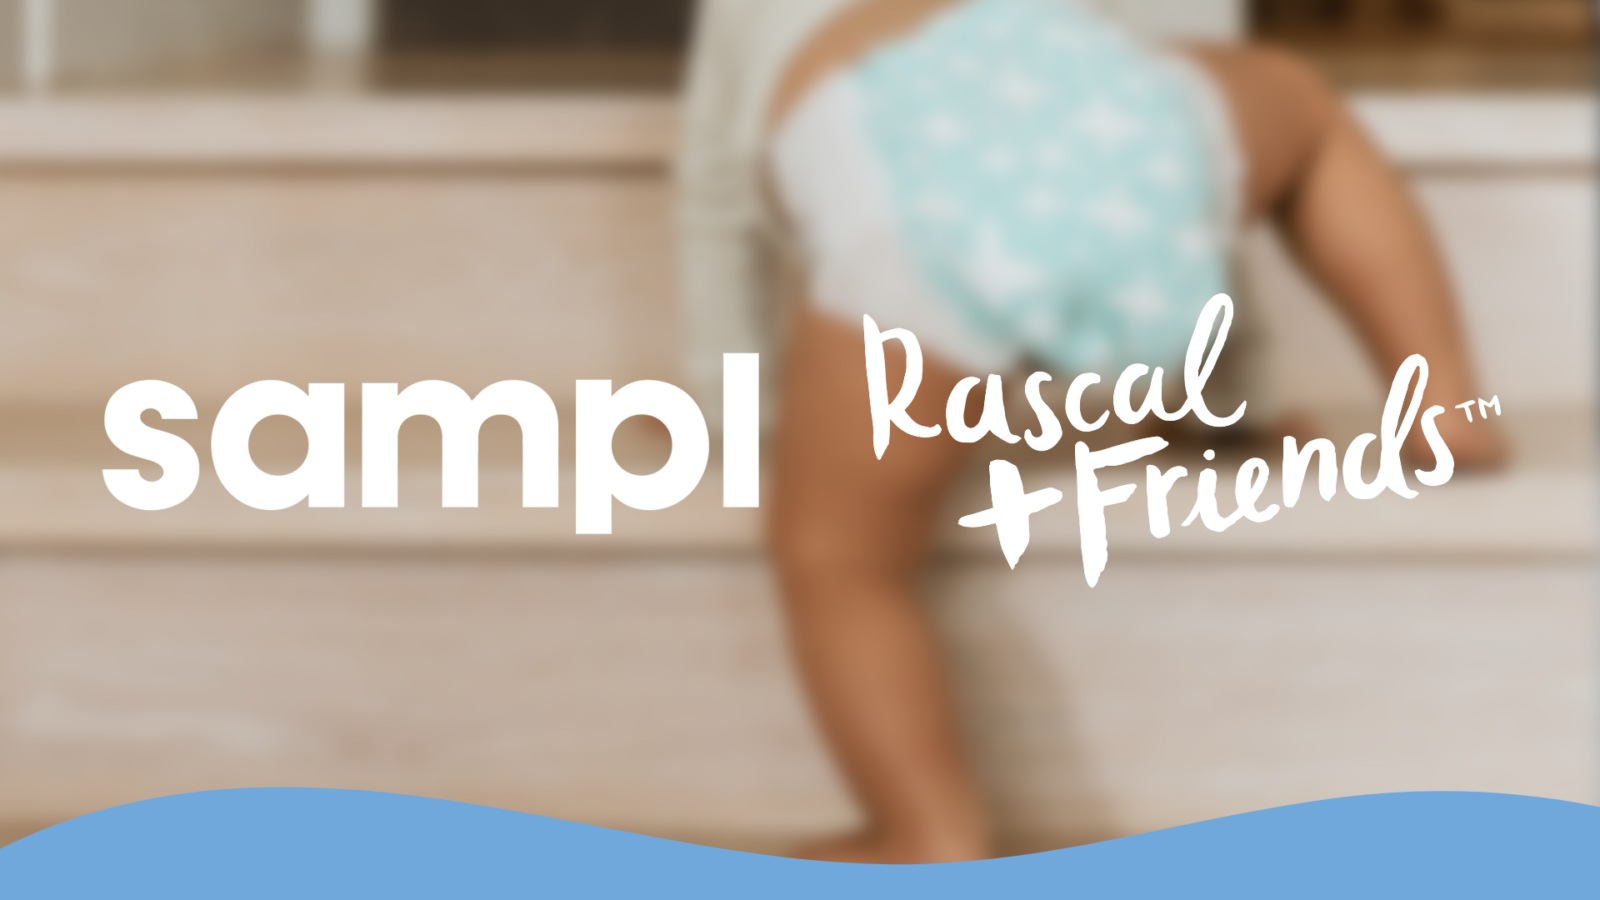 rascal and friends with sampl logos in front of blurred image of baby climbing stairs